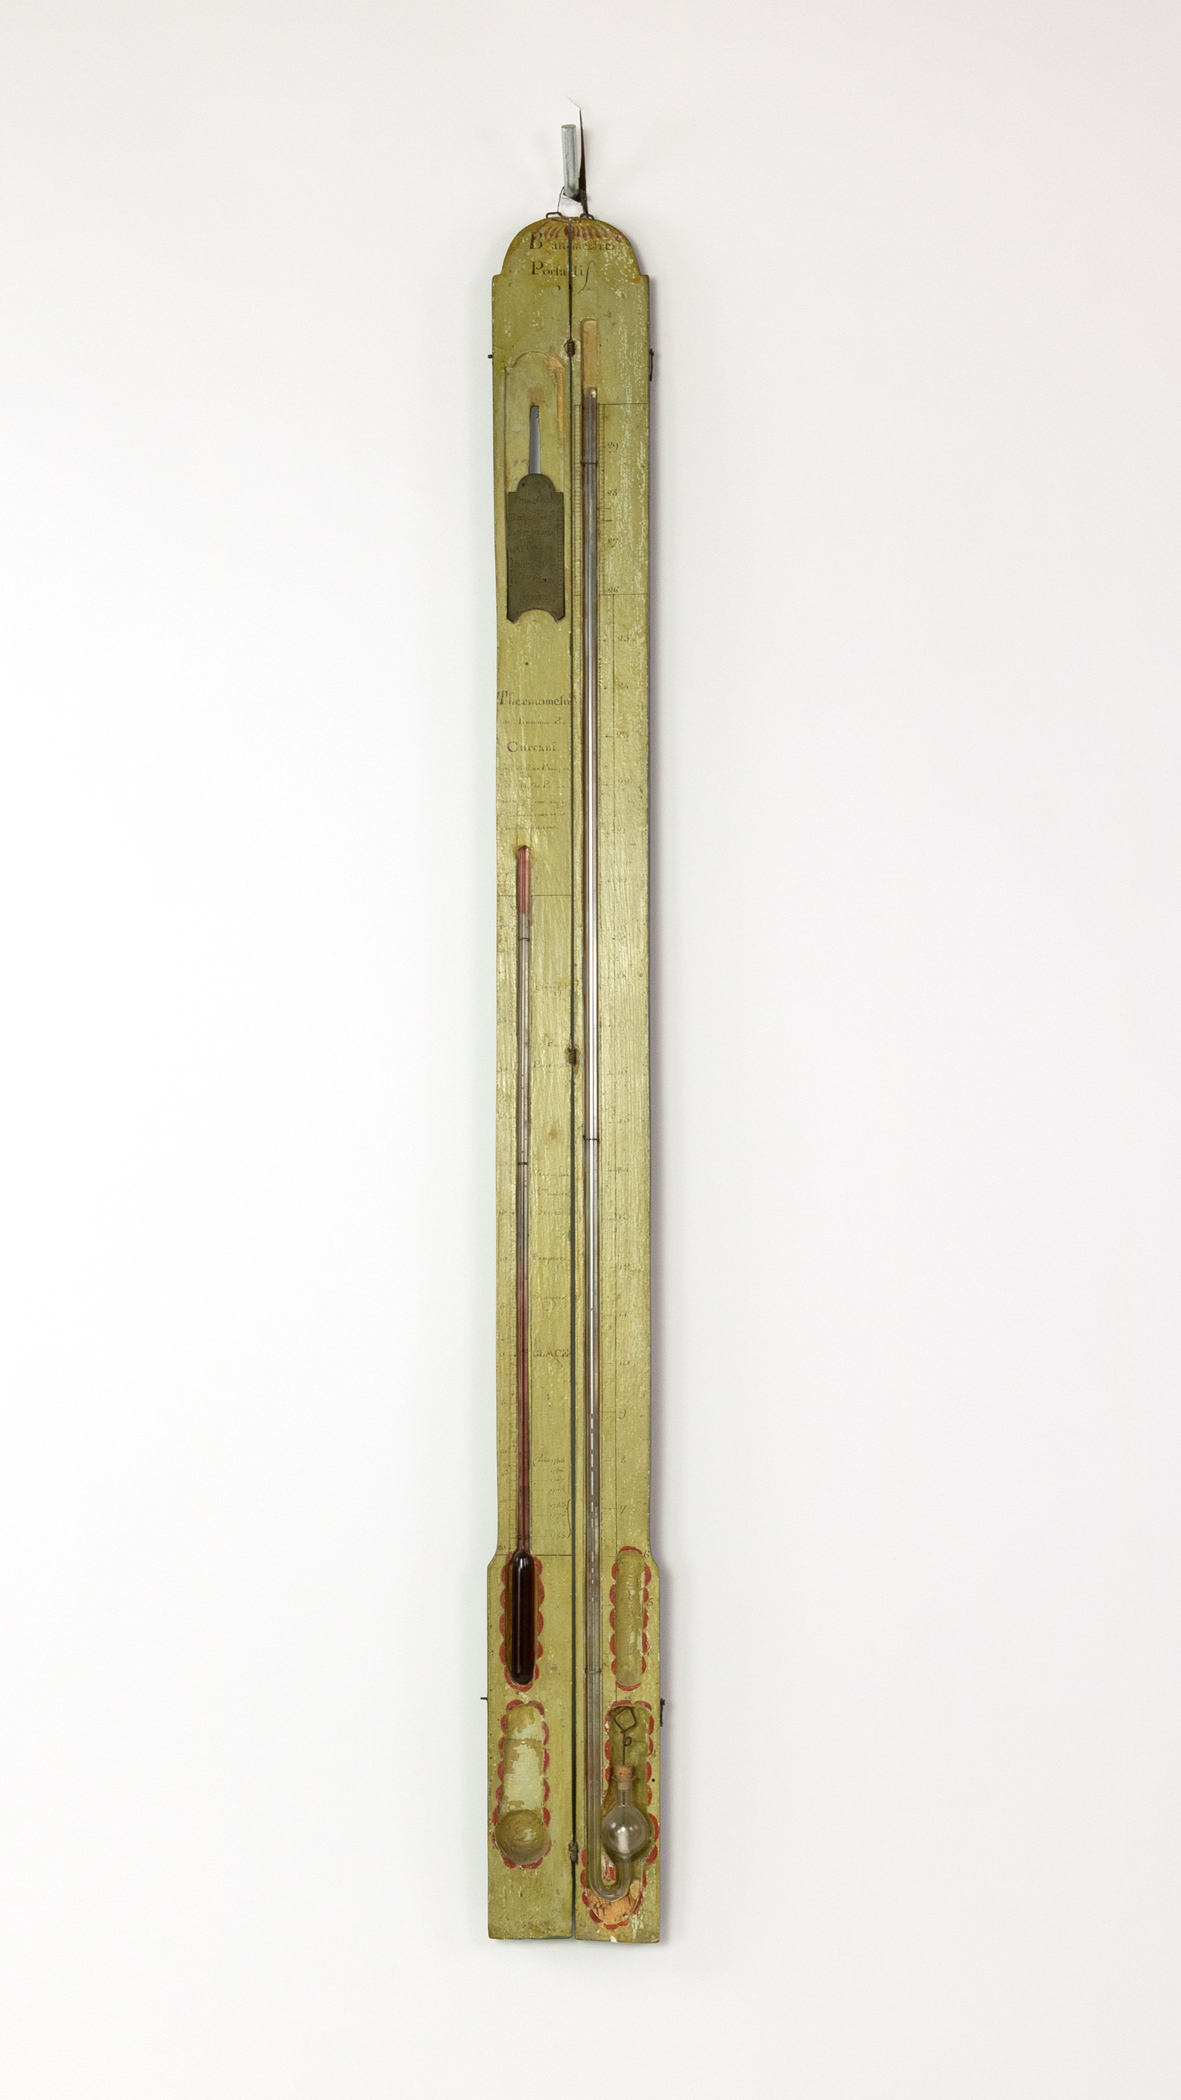 https://www.gardencourtantiques.com/wp-content/uploads/2021/06/louis-xvi-portable-barometer-thermometer-french-late-18th-century-garden-court-antiques-005.jpg